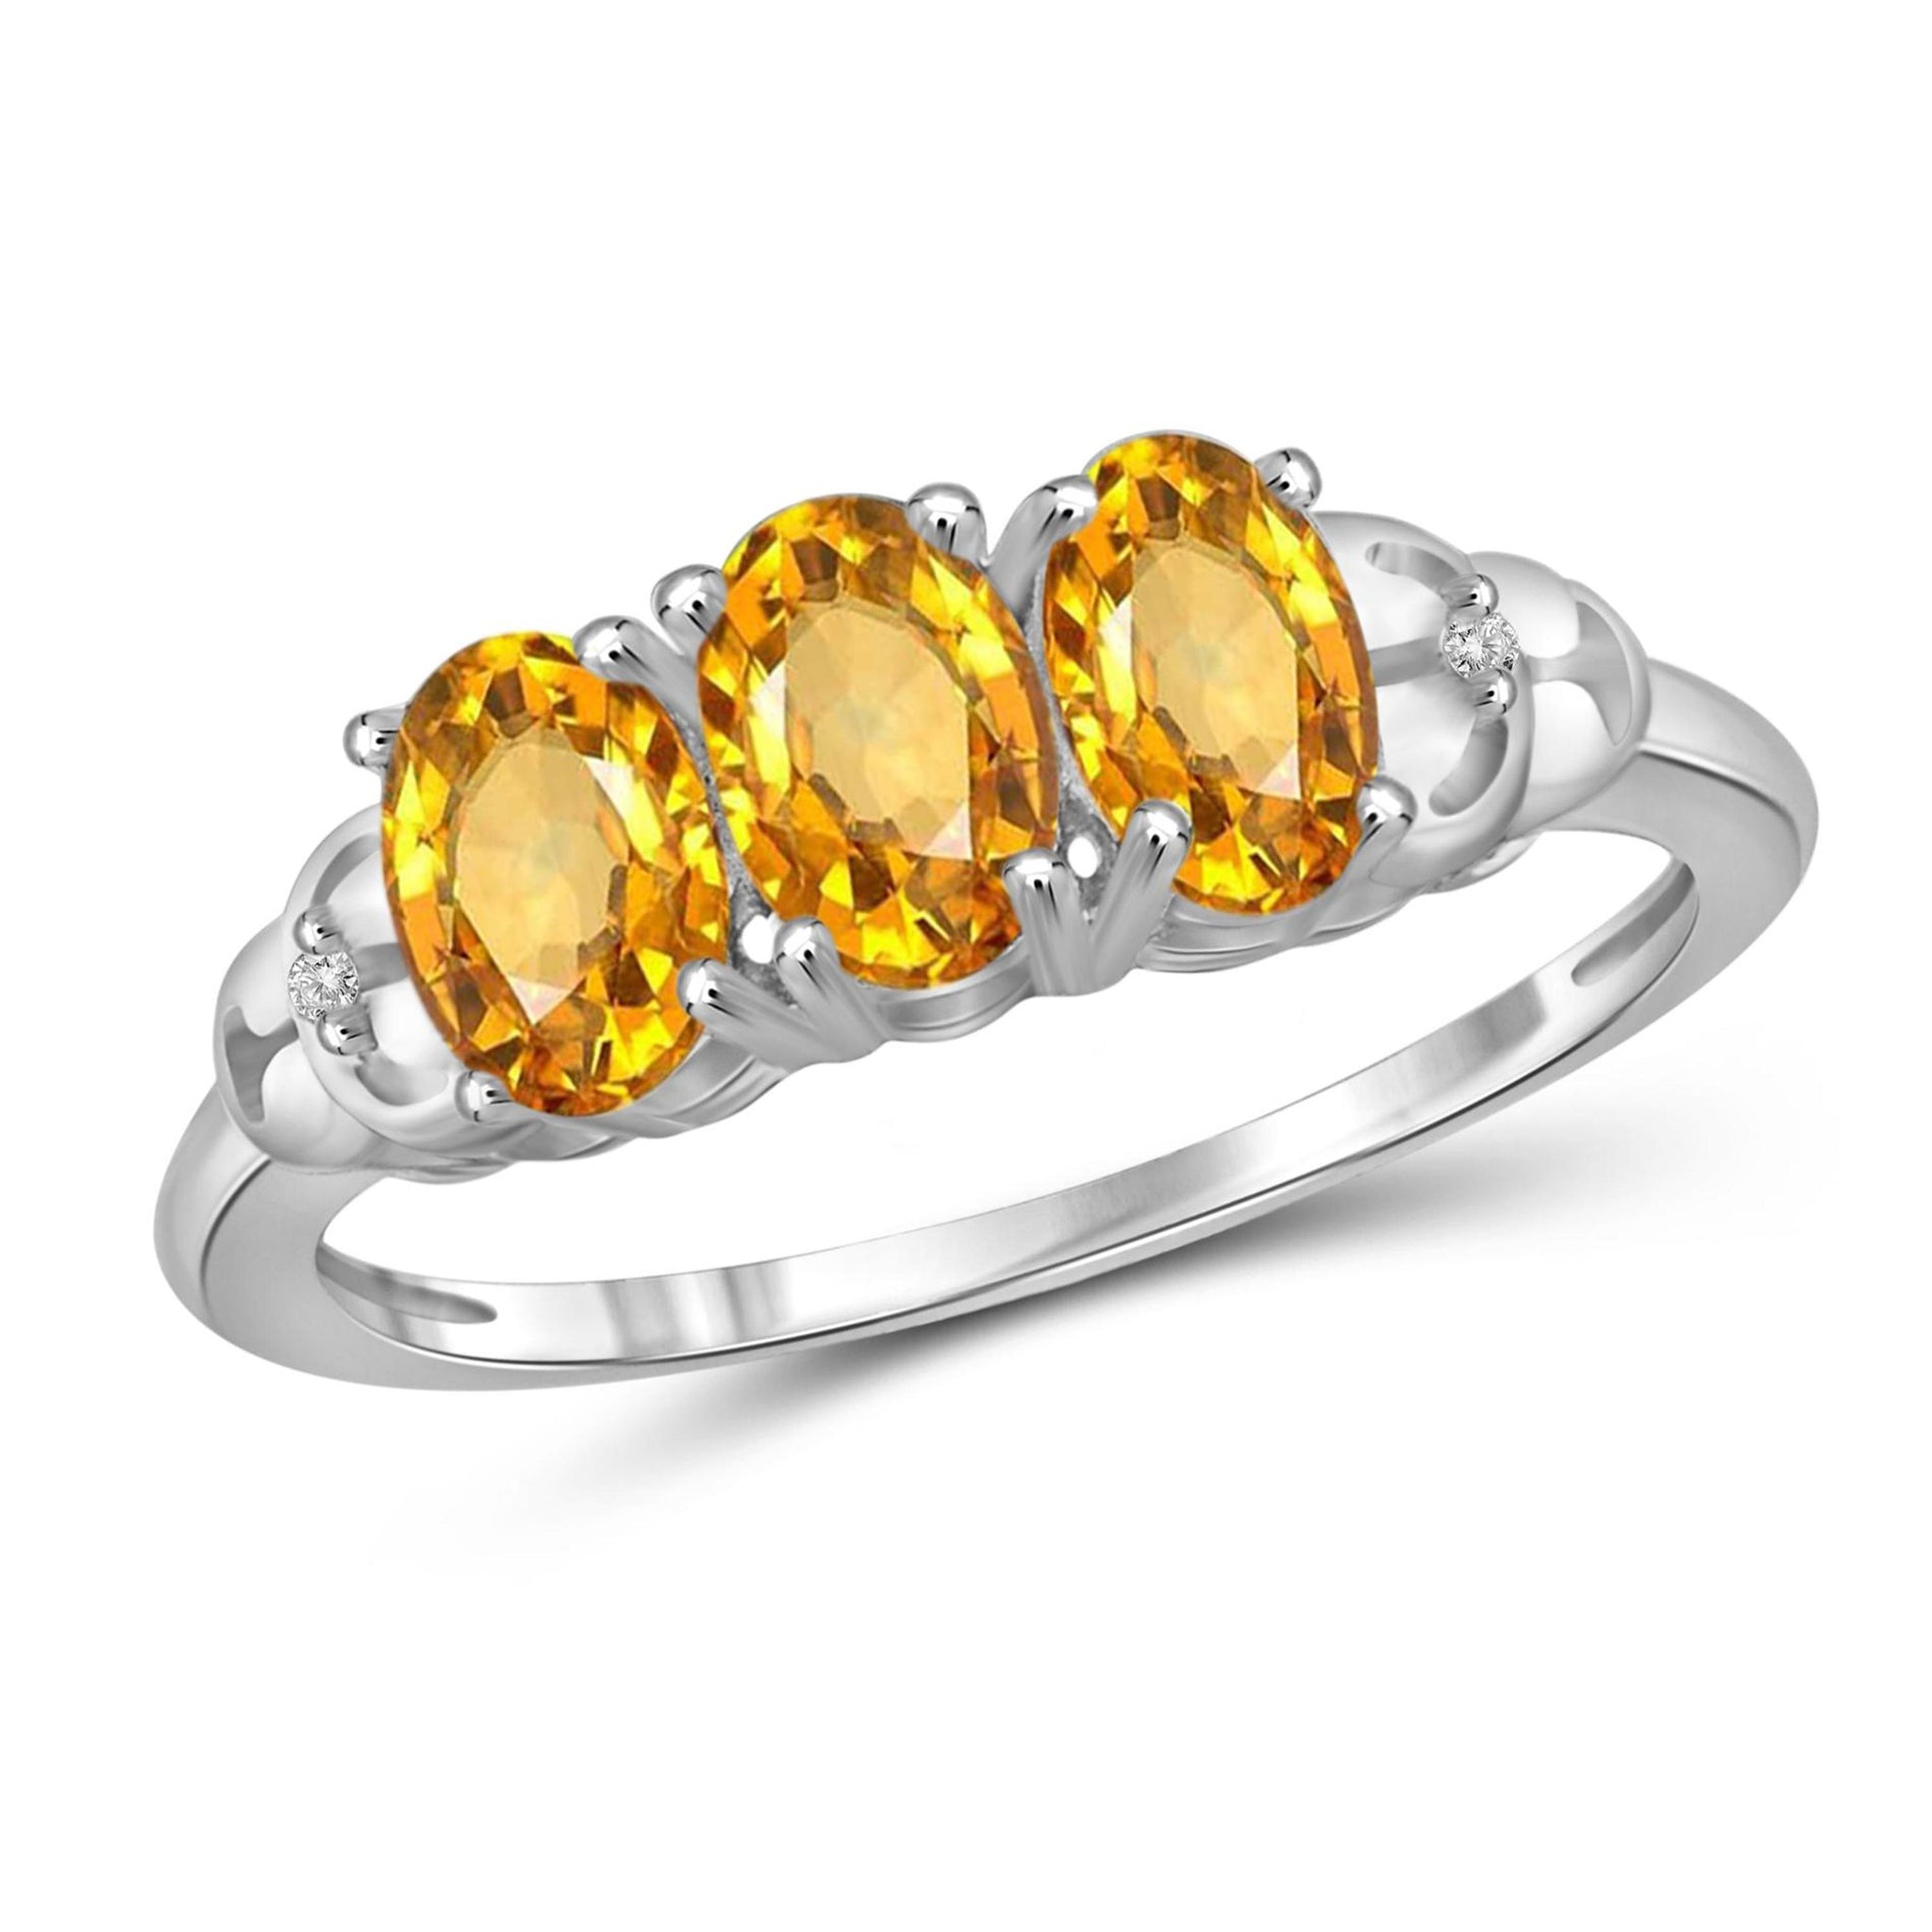 JewelonFire 1 1/3 Carat T.G.W. Citrine And White Diamond Accent Sterling Silver 3 Stone Ring - Assorted Colors